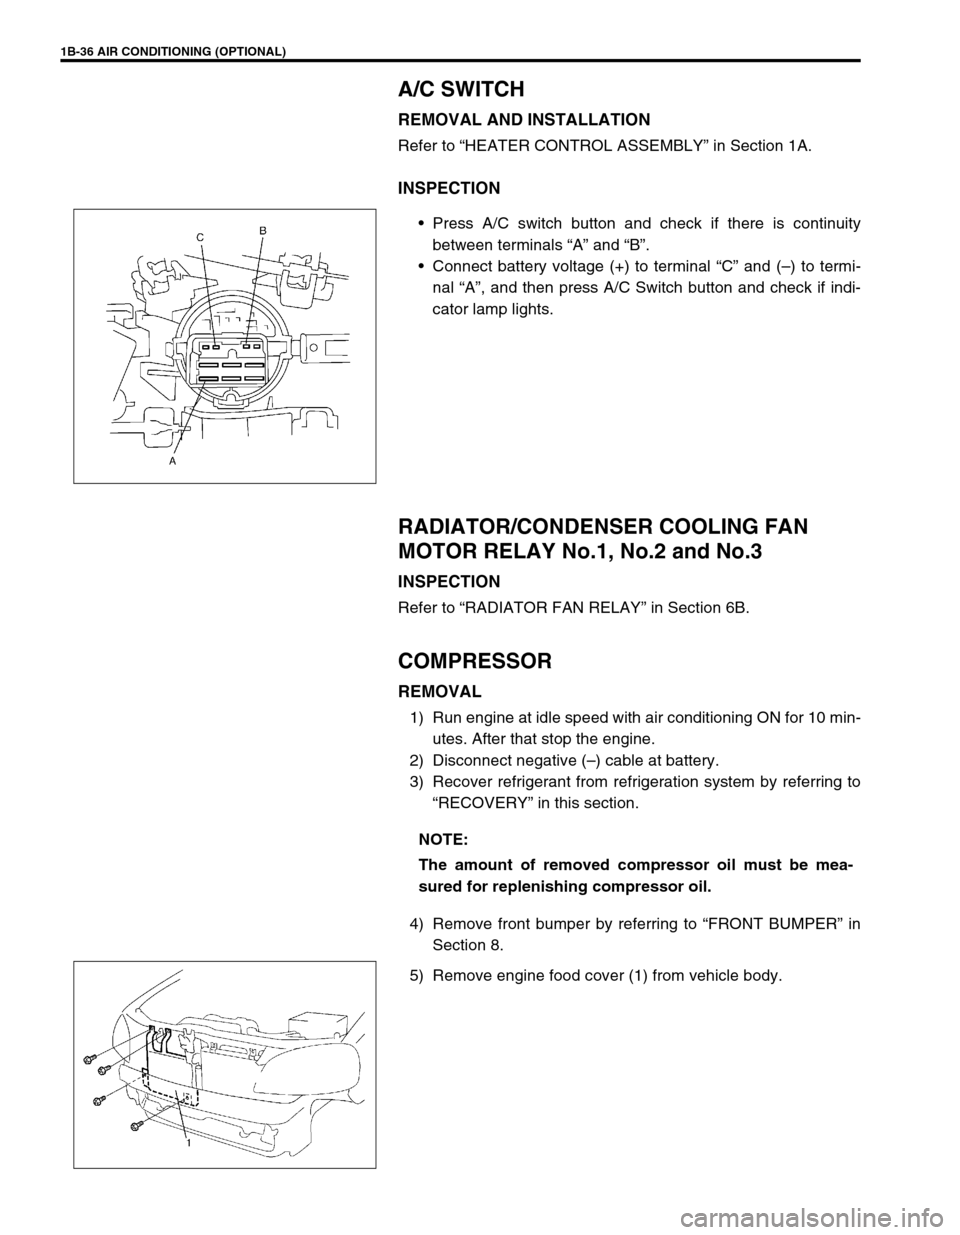 SUZUKI SWIFT 2000 1.G RG413 Service Workshop Manual 1B-36 AIR CONDITIONING (OPTIONAL)
A/C SWITCH
REMOVAL AND INSTALLATION
Refer to “HEATER CONTROL ASSEMBLY” in Section 1A.
INSPECTION
Press A/C switch button and check if there is continuity
between